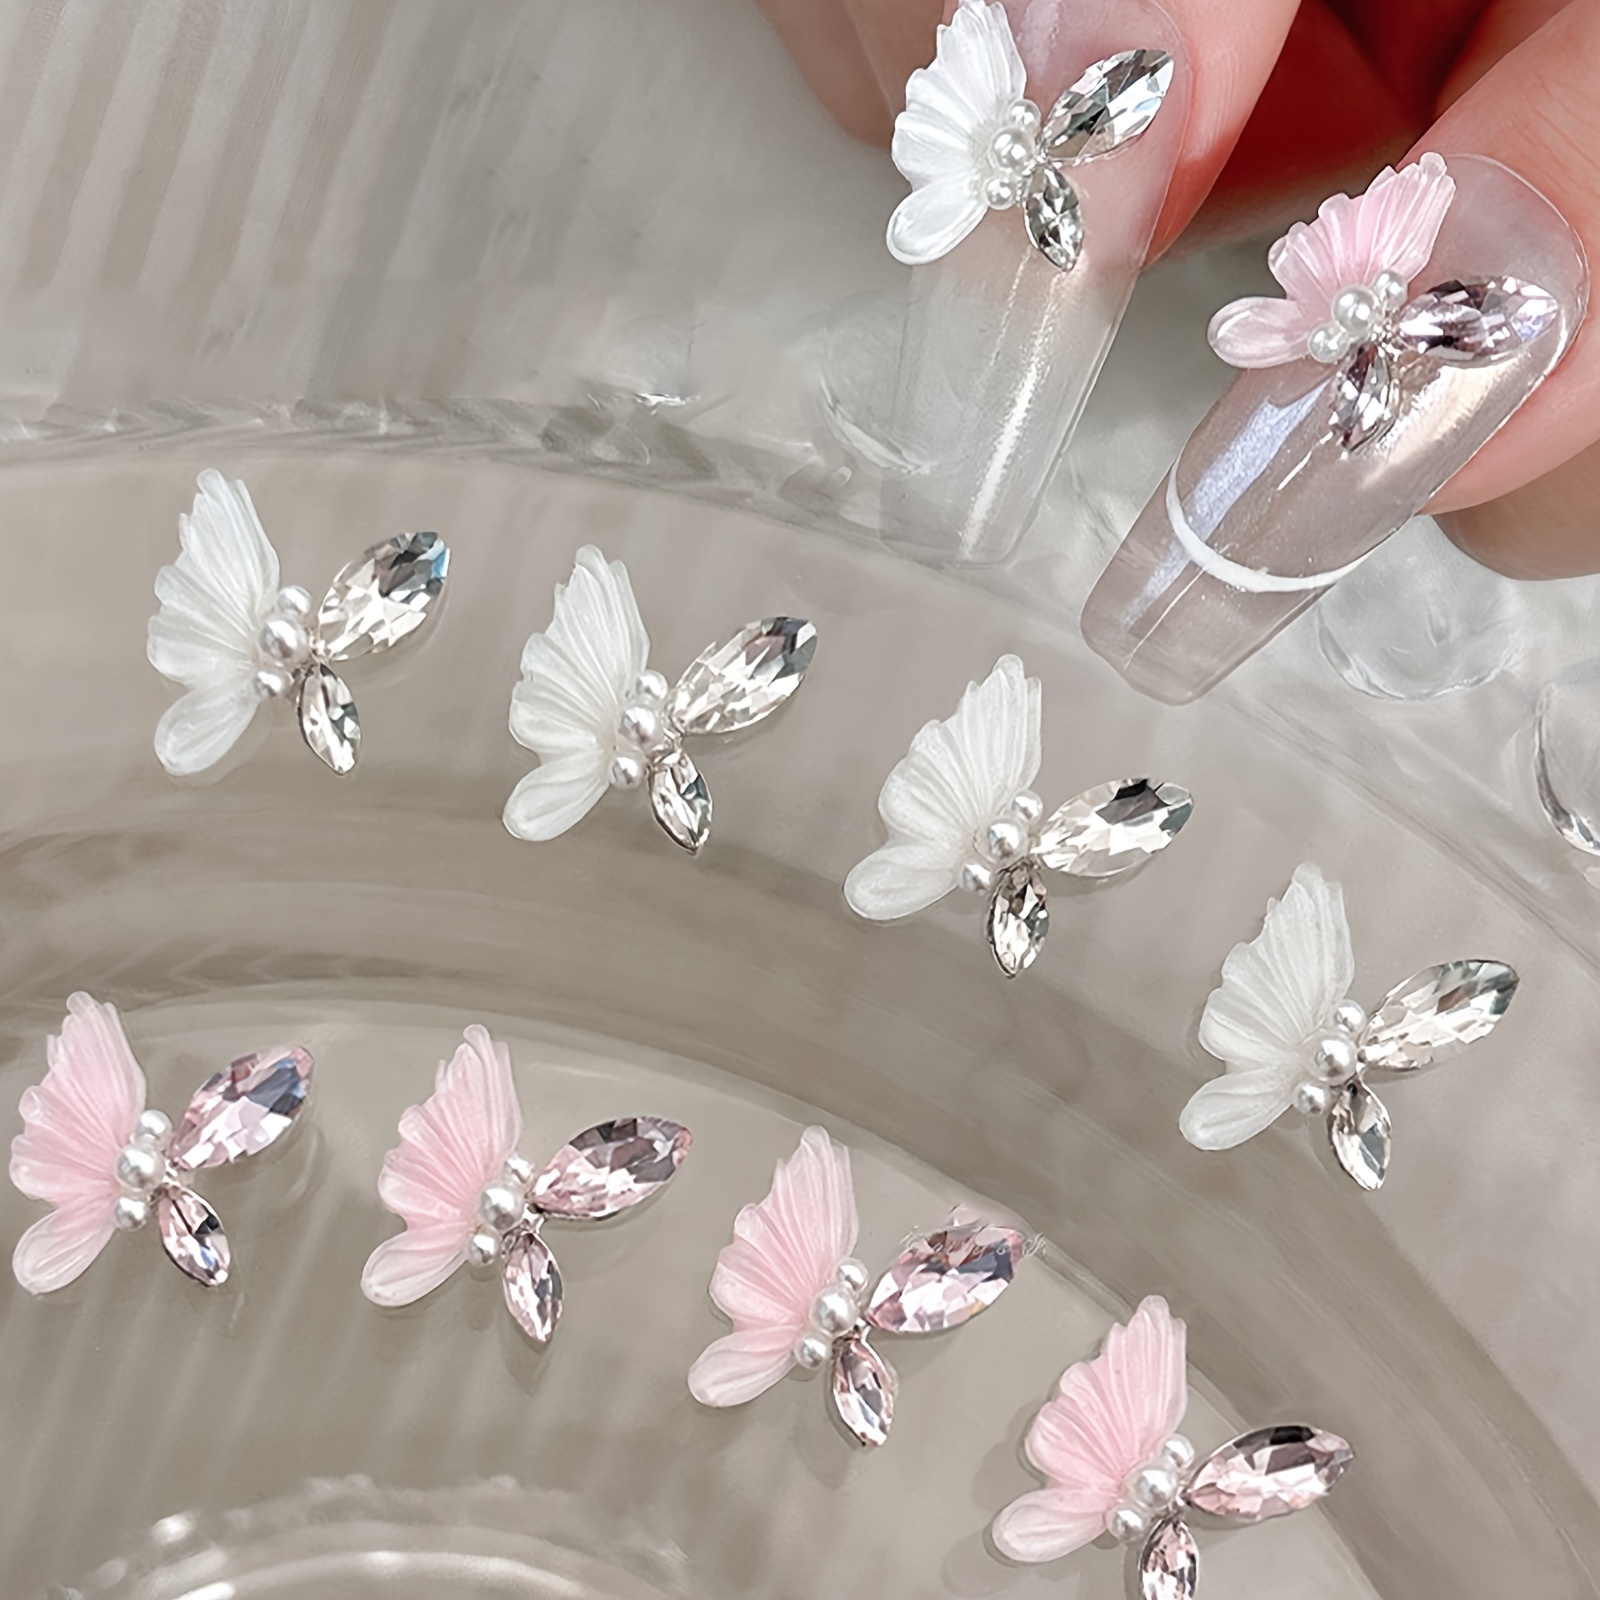 

20pcs Luxury 3d Butterfly Nail Charms With Pearls & Rhinestones - Pink & White Fairy Butterflies For Elegant Nail Art, Perfect For Summer Vacations Nail Charms Butterfly Butterfly Charms For Nails